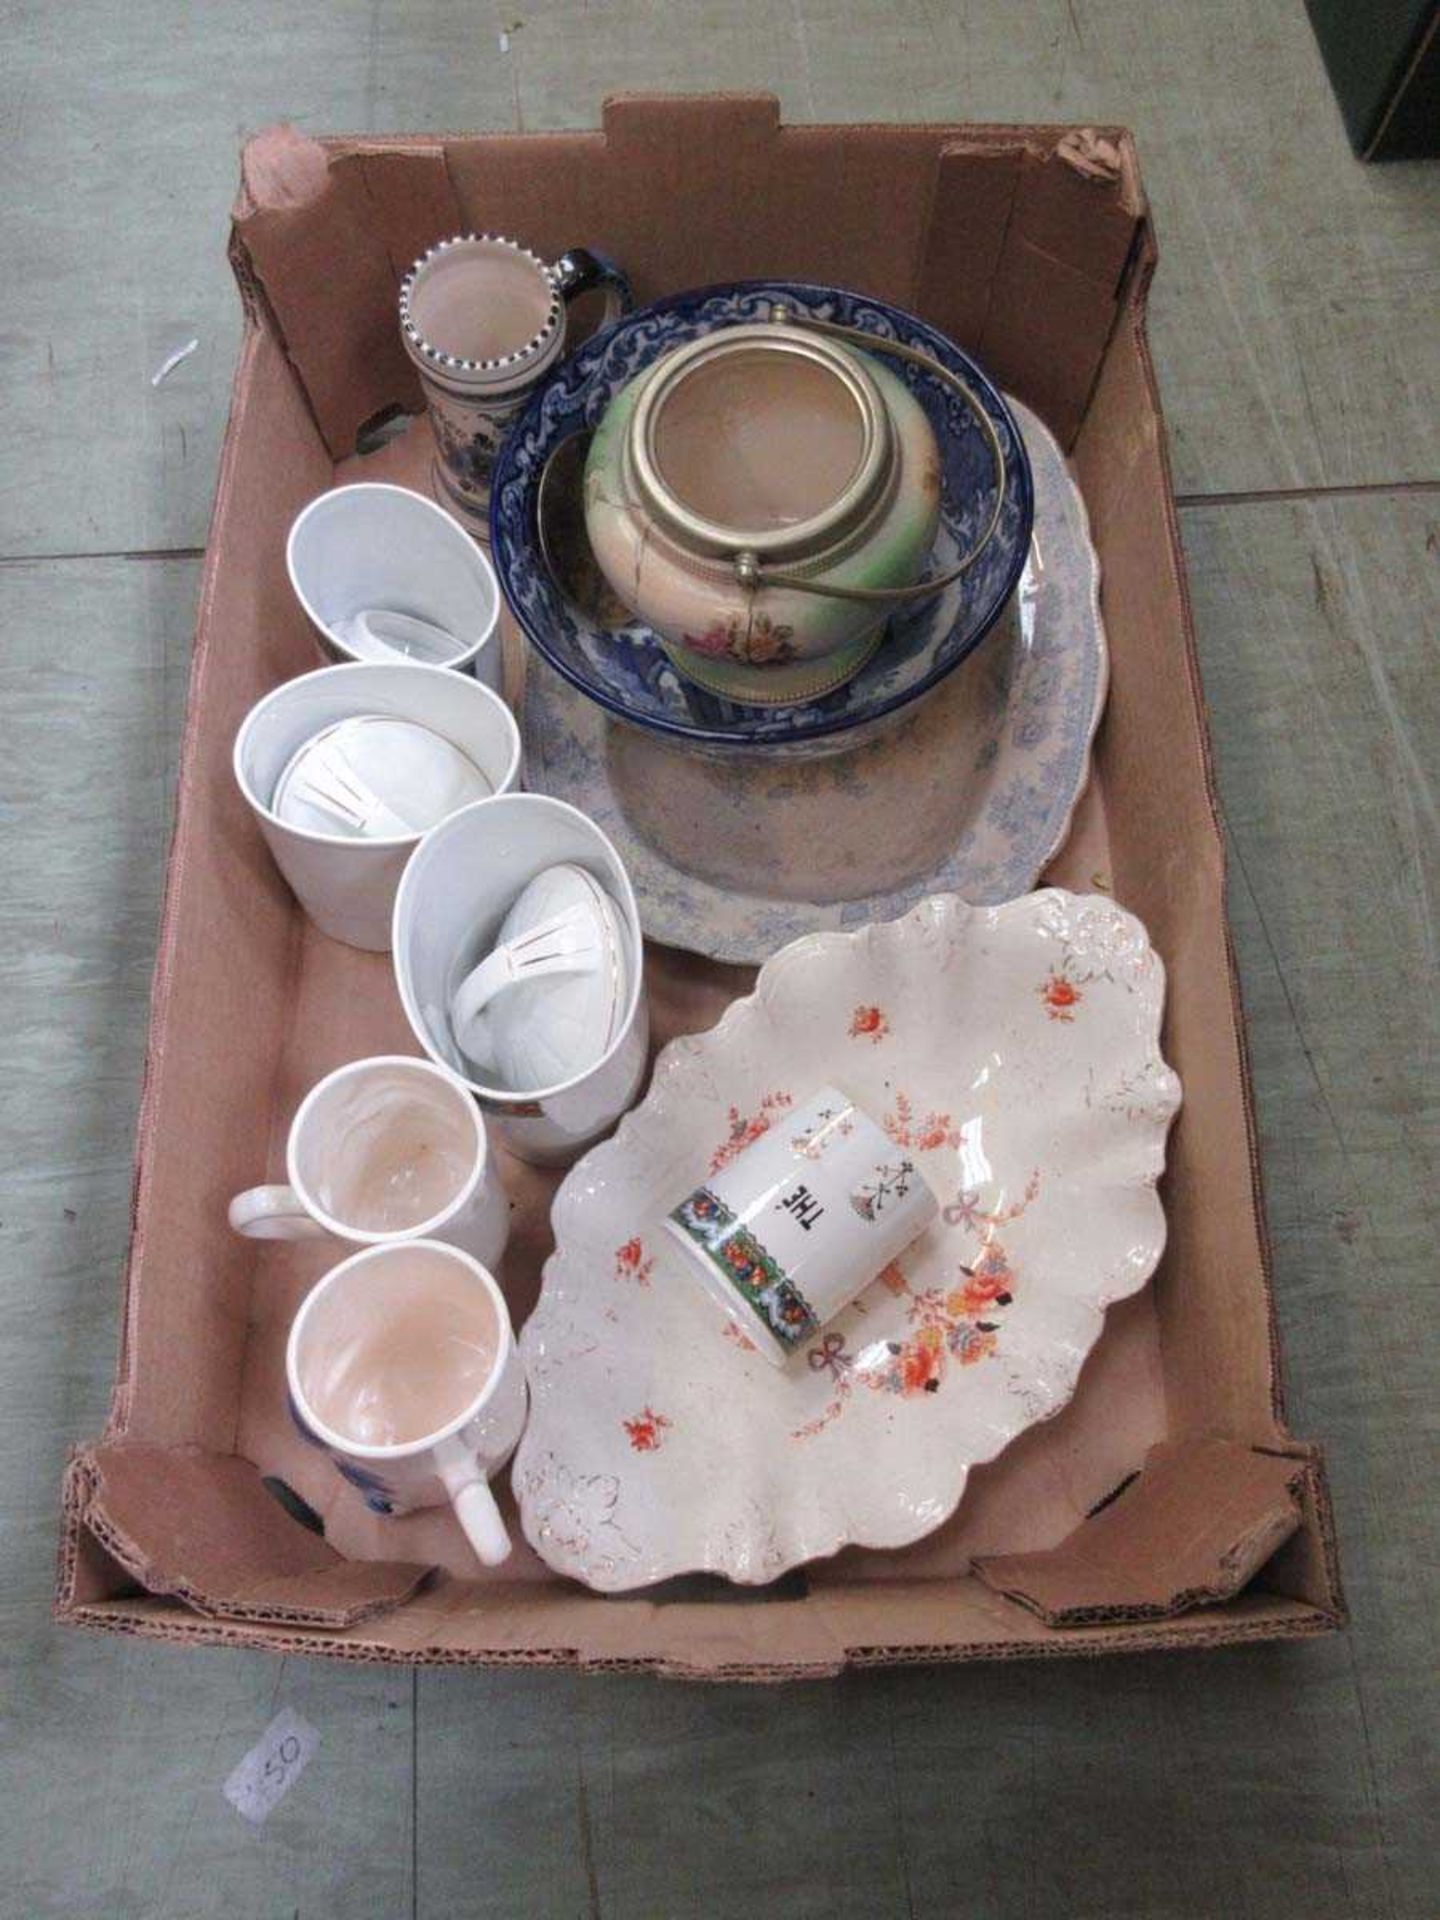 A tray of ceramic ware to include mugs, bowls, plates, etc